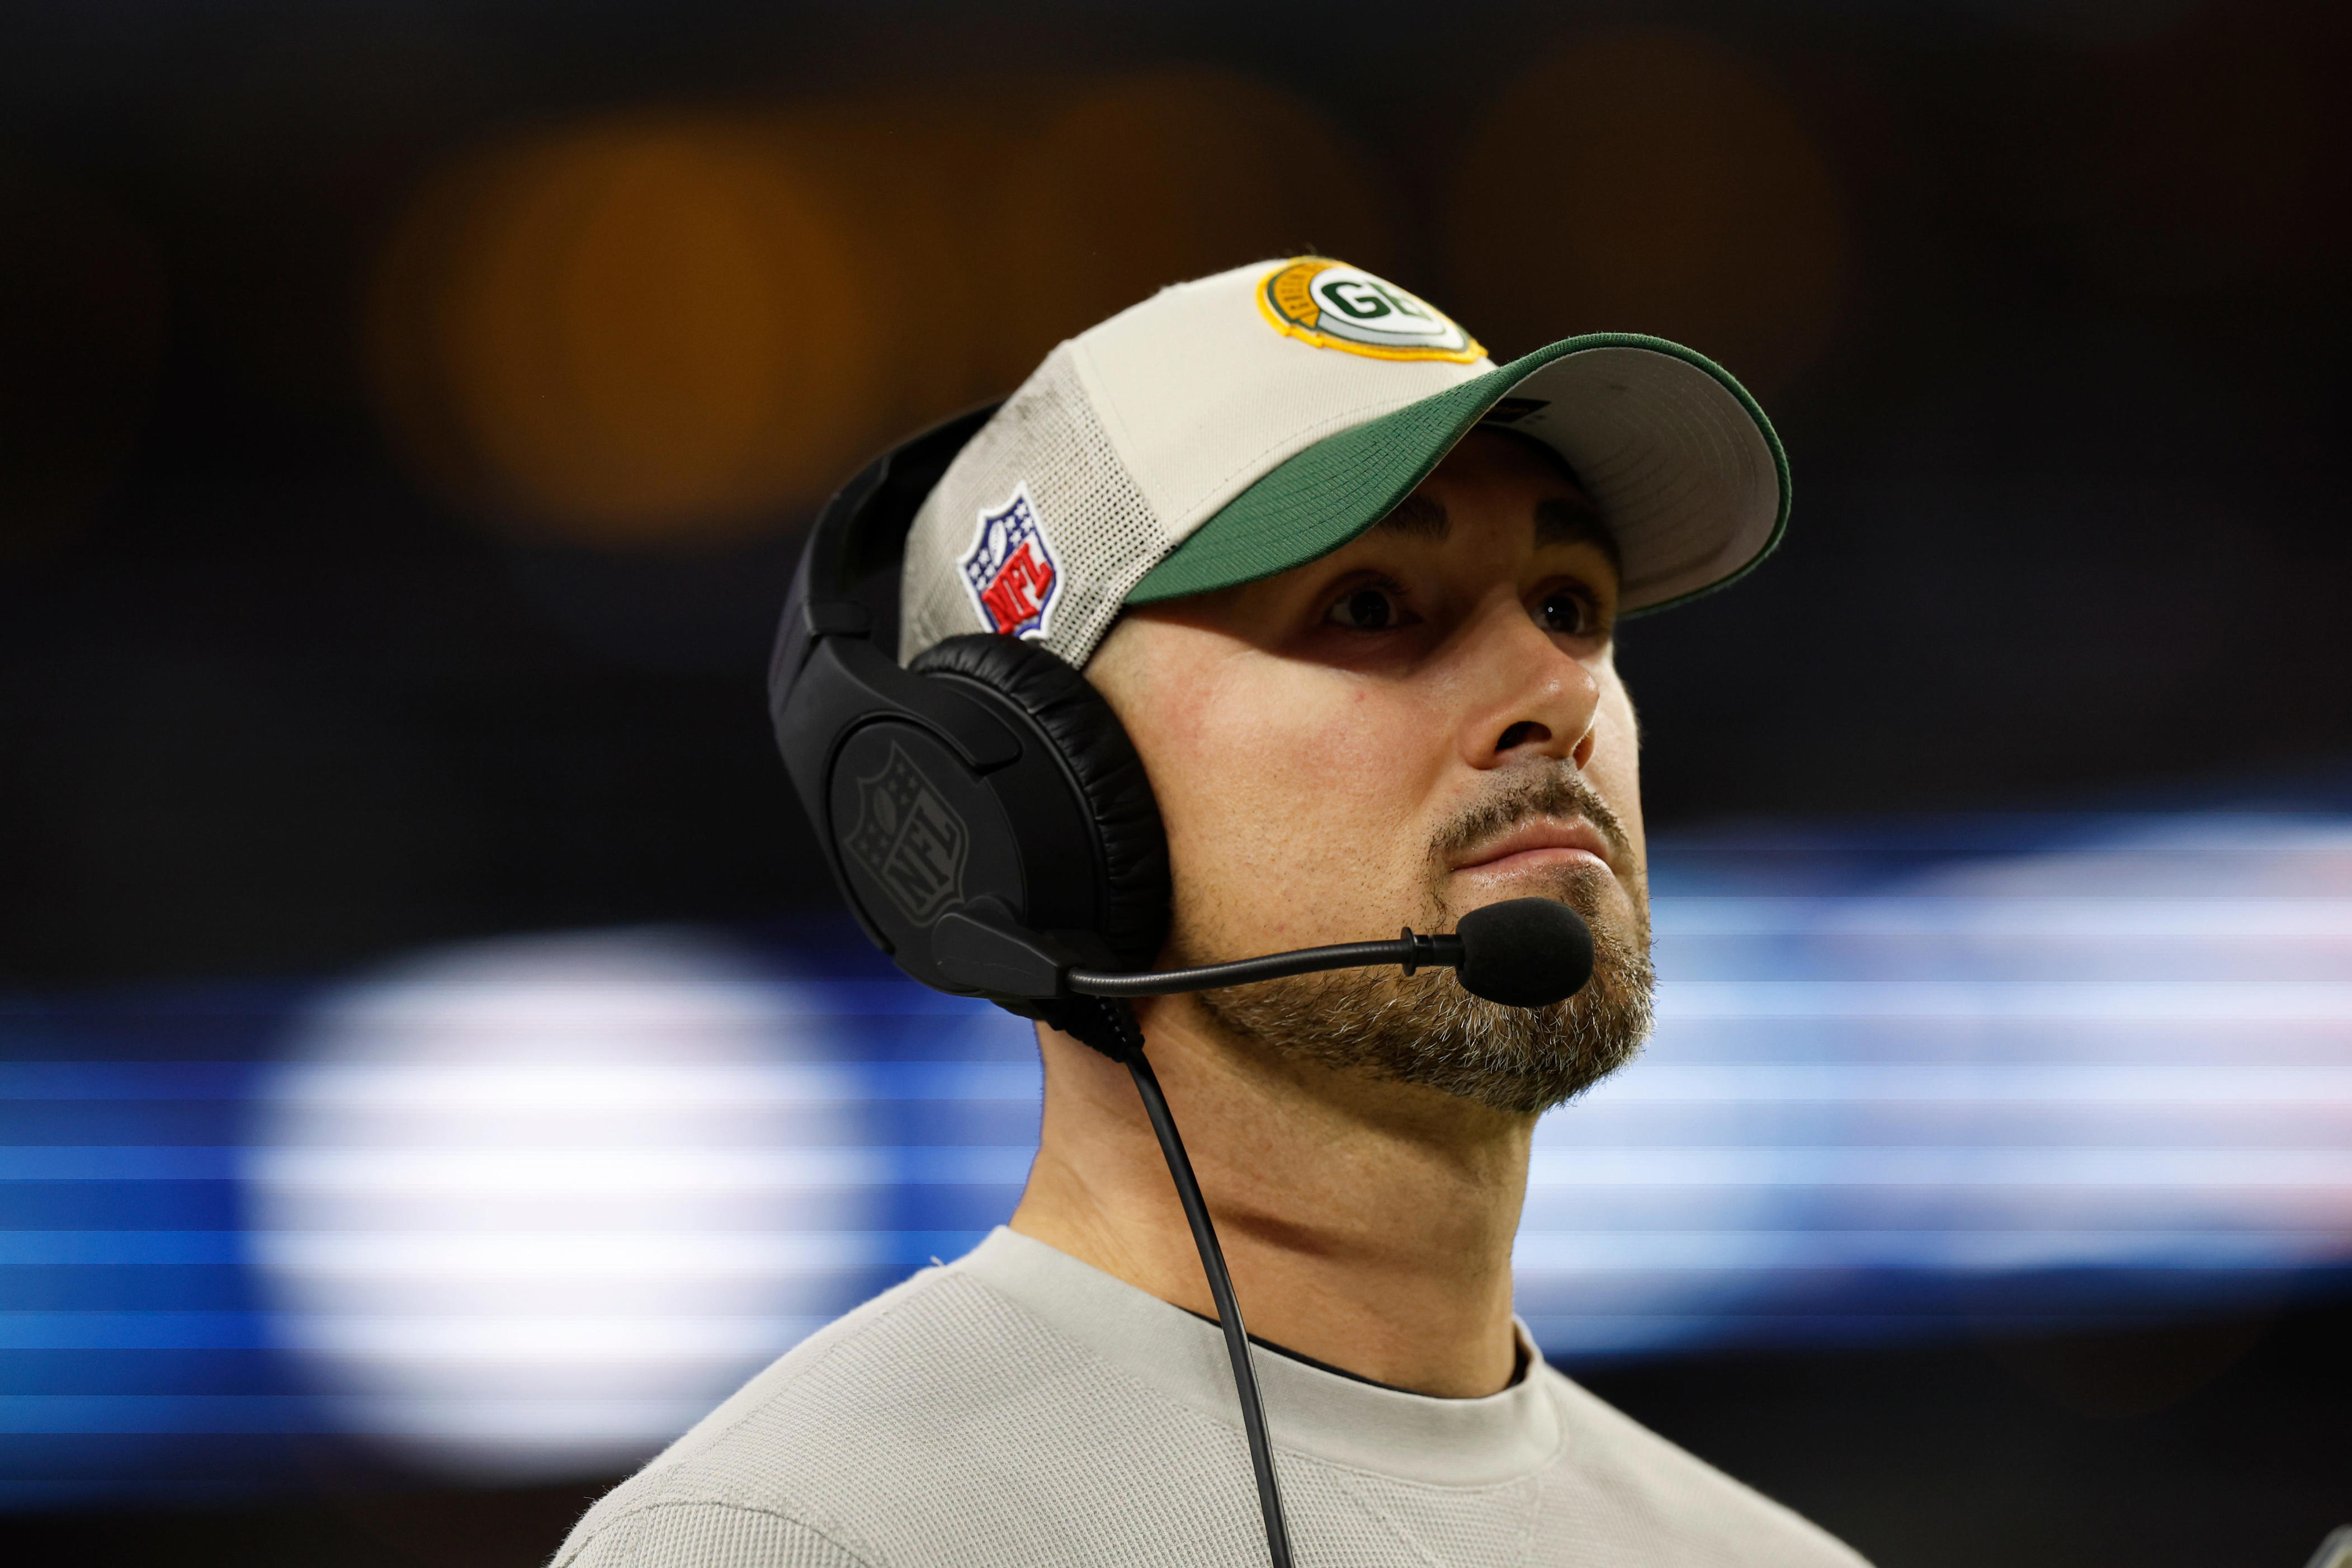 matt lafleur's quote about always 'praying' before anders carlson kicks got roasted after packers kicker missed